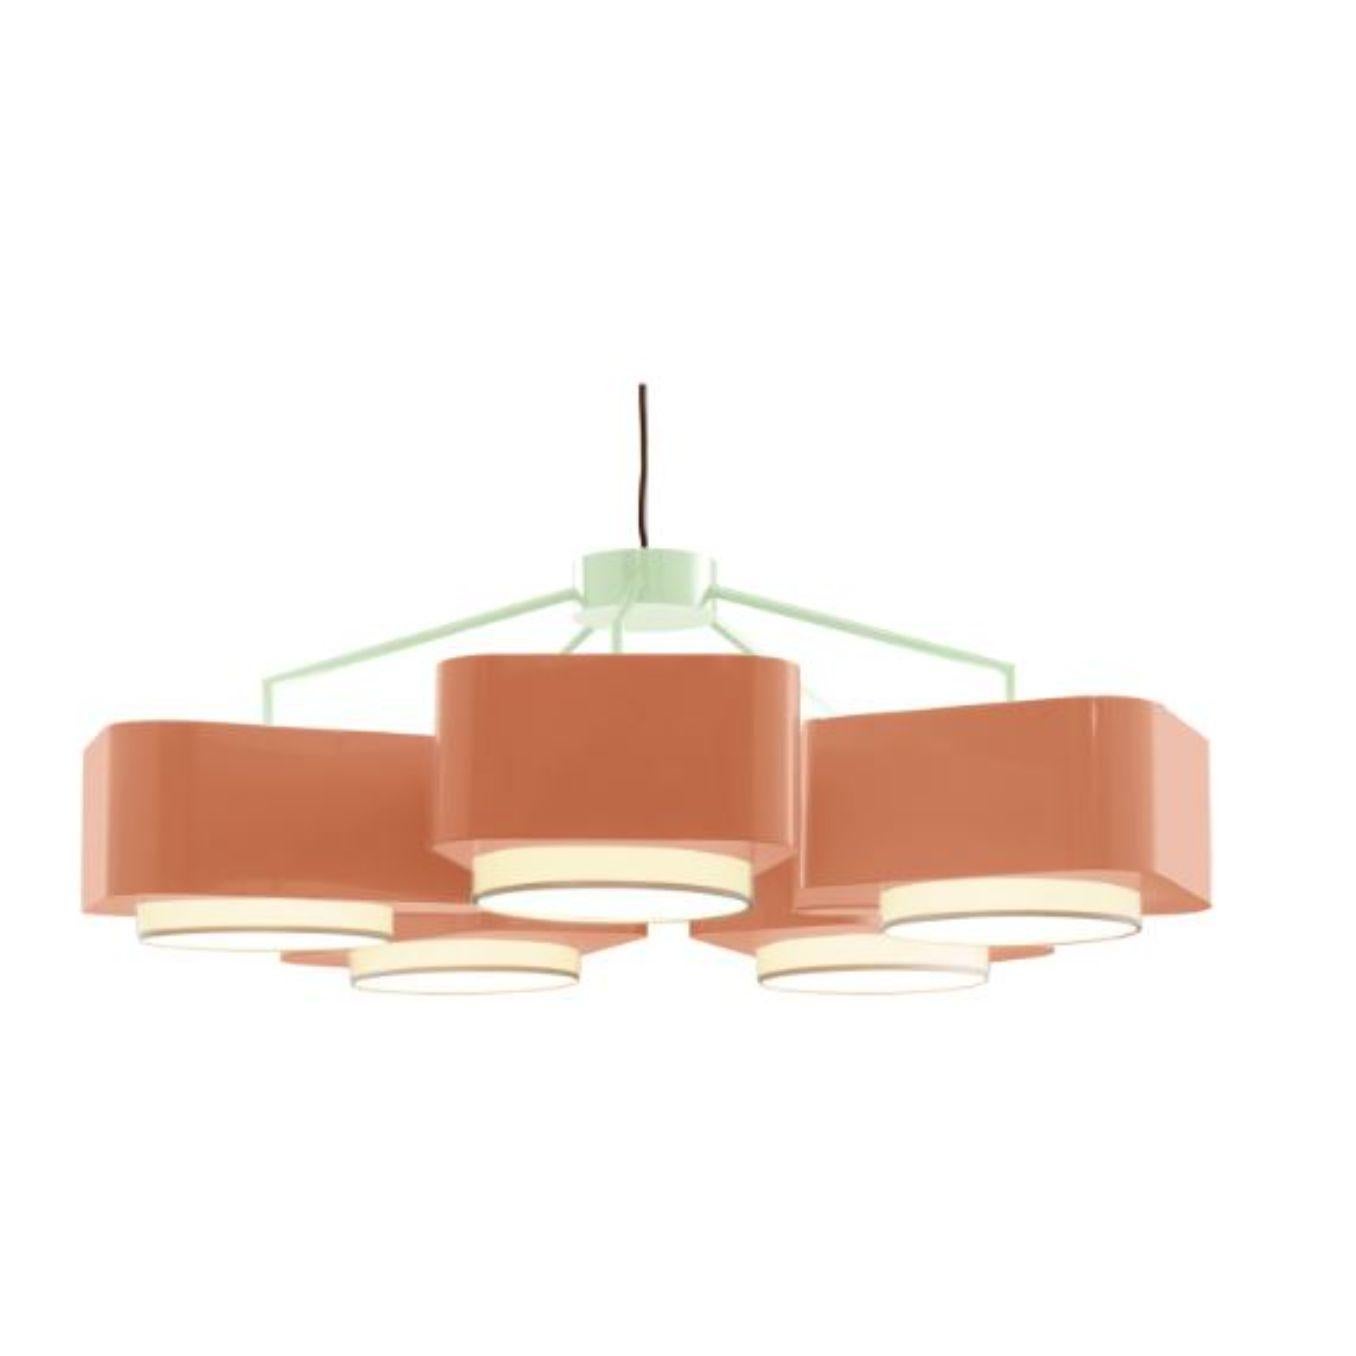 Dream and Salmon Carousel Suspension lamp by Dooq
Dimensions: W 110 x D 110 x H 40 cm
Materials: lacquered metal.
abat-jour: cotton
Also available in different colors.

Information:
230V/50Hz
E27/5x20W LED
120V/60Hz
E26/5x15W LED
bulbs not